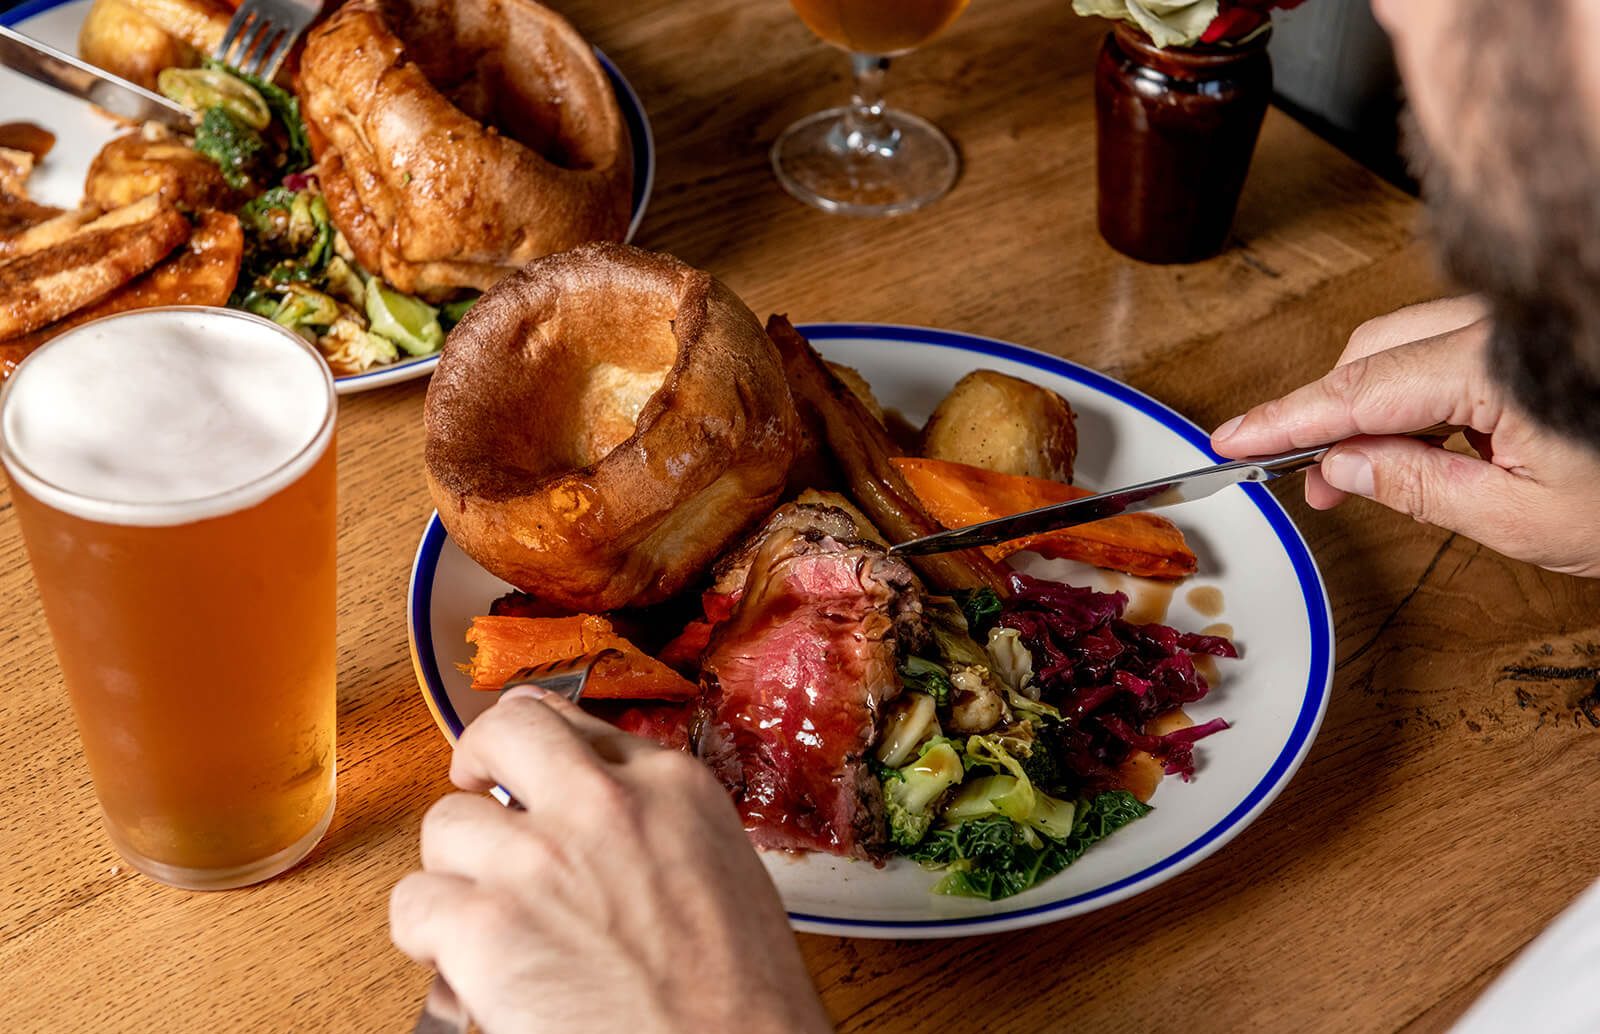 A plate of Sunday Roast with beef, yorkshire pudding, and vegetables